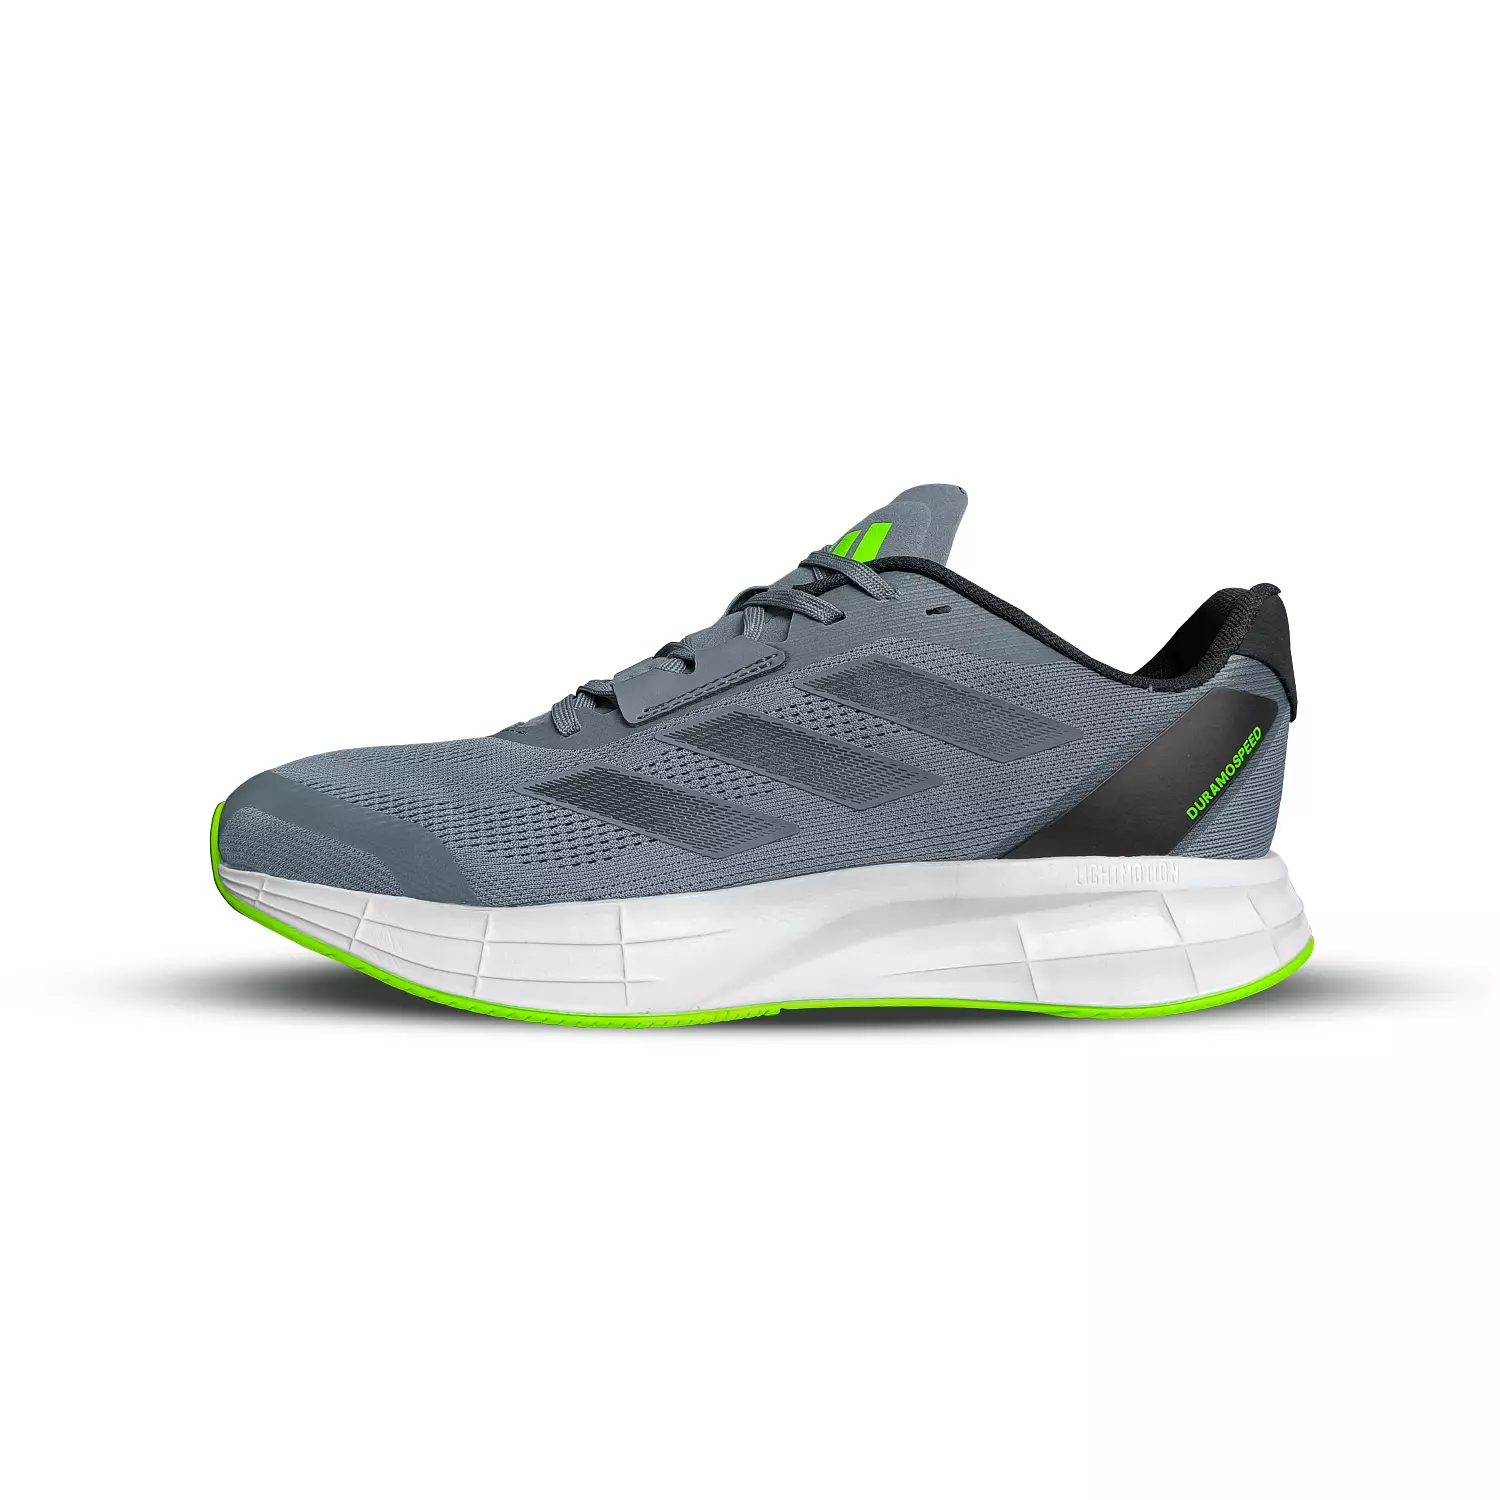 ADIDAS LIGHMOTION - RUNNING SHOES hover image